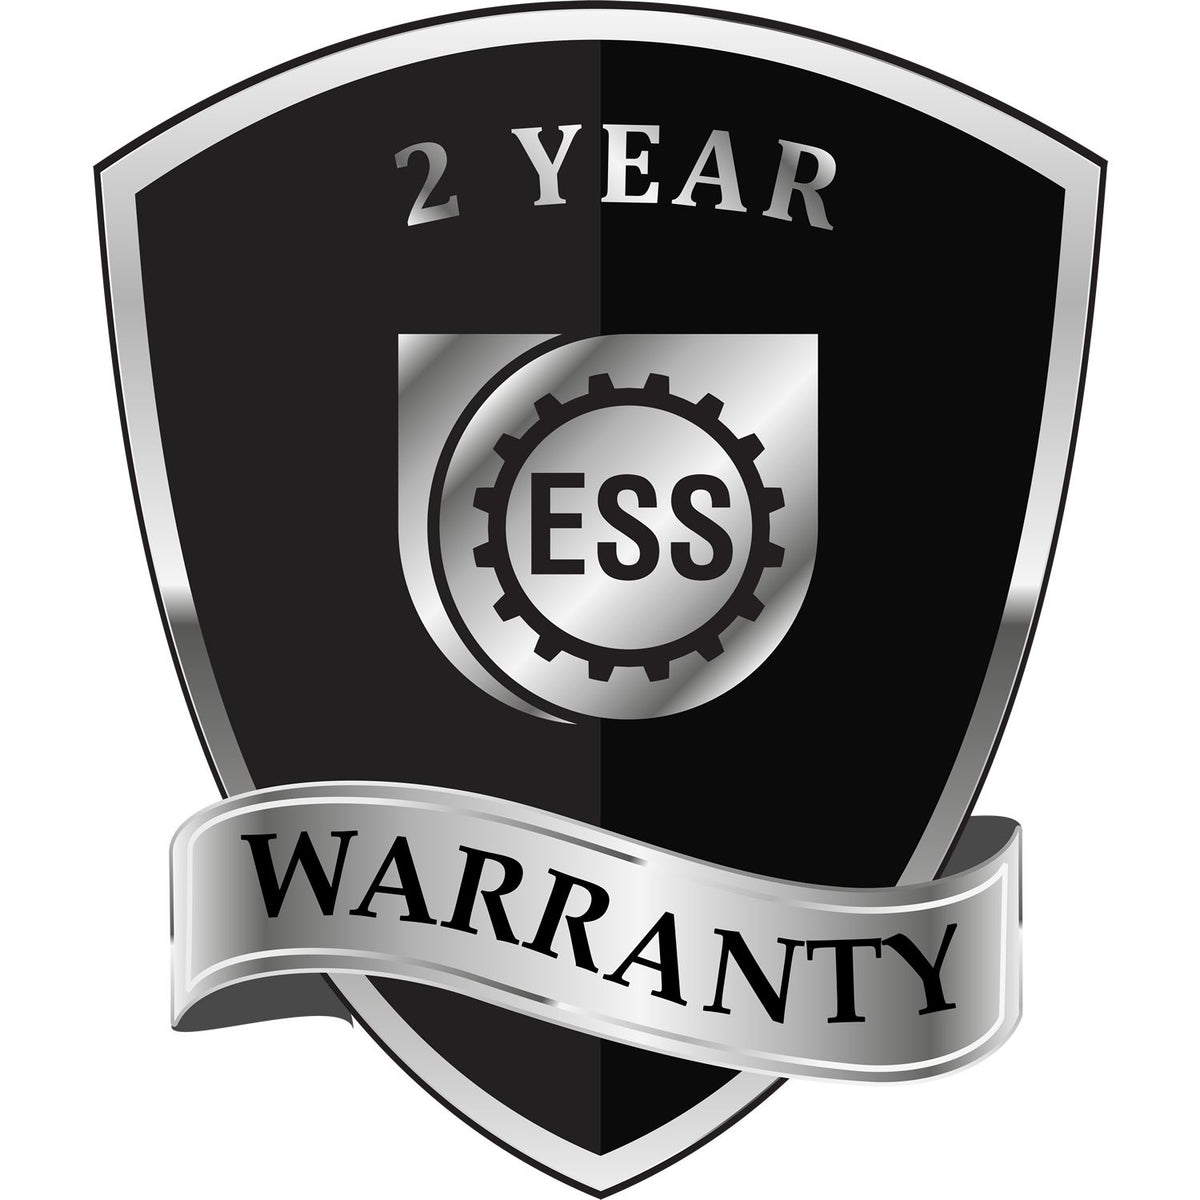 A black and silver badge or emblem showing warranty information for the Hybrid Louisiana Engineer Seal